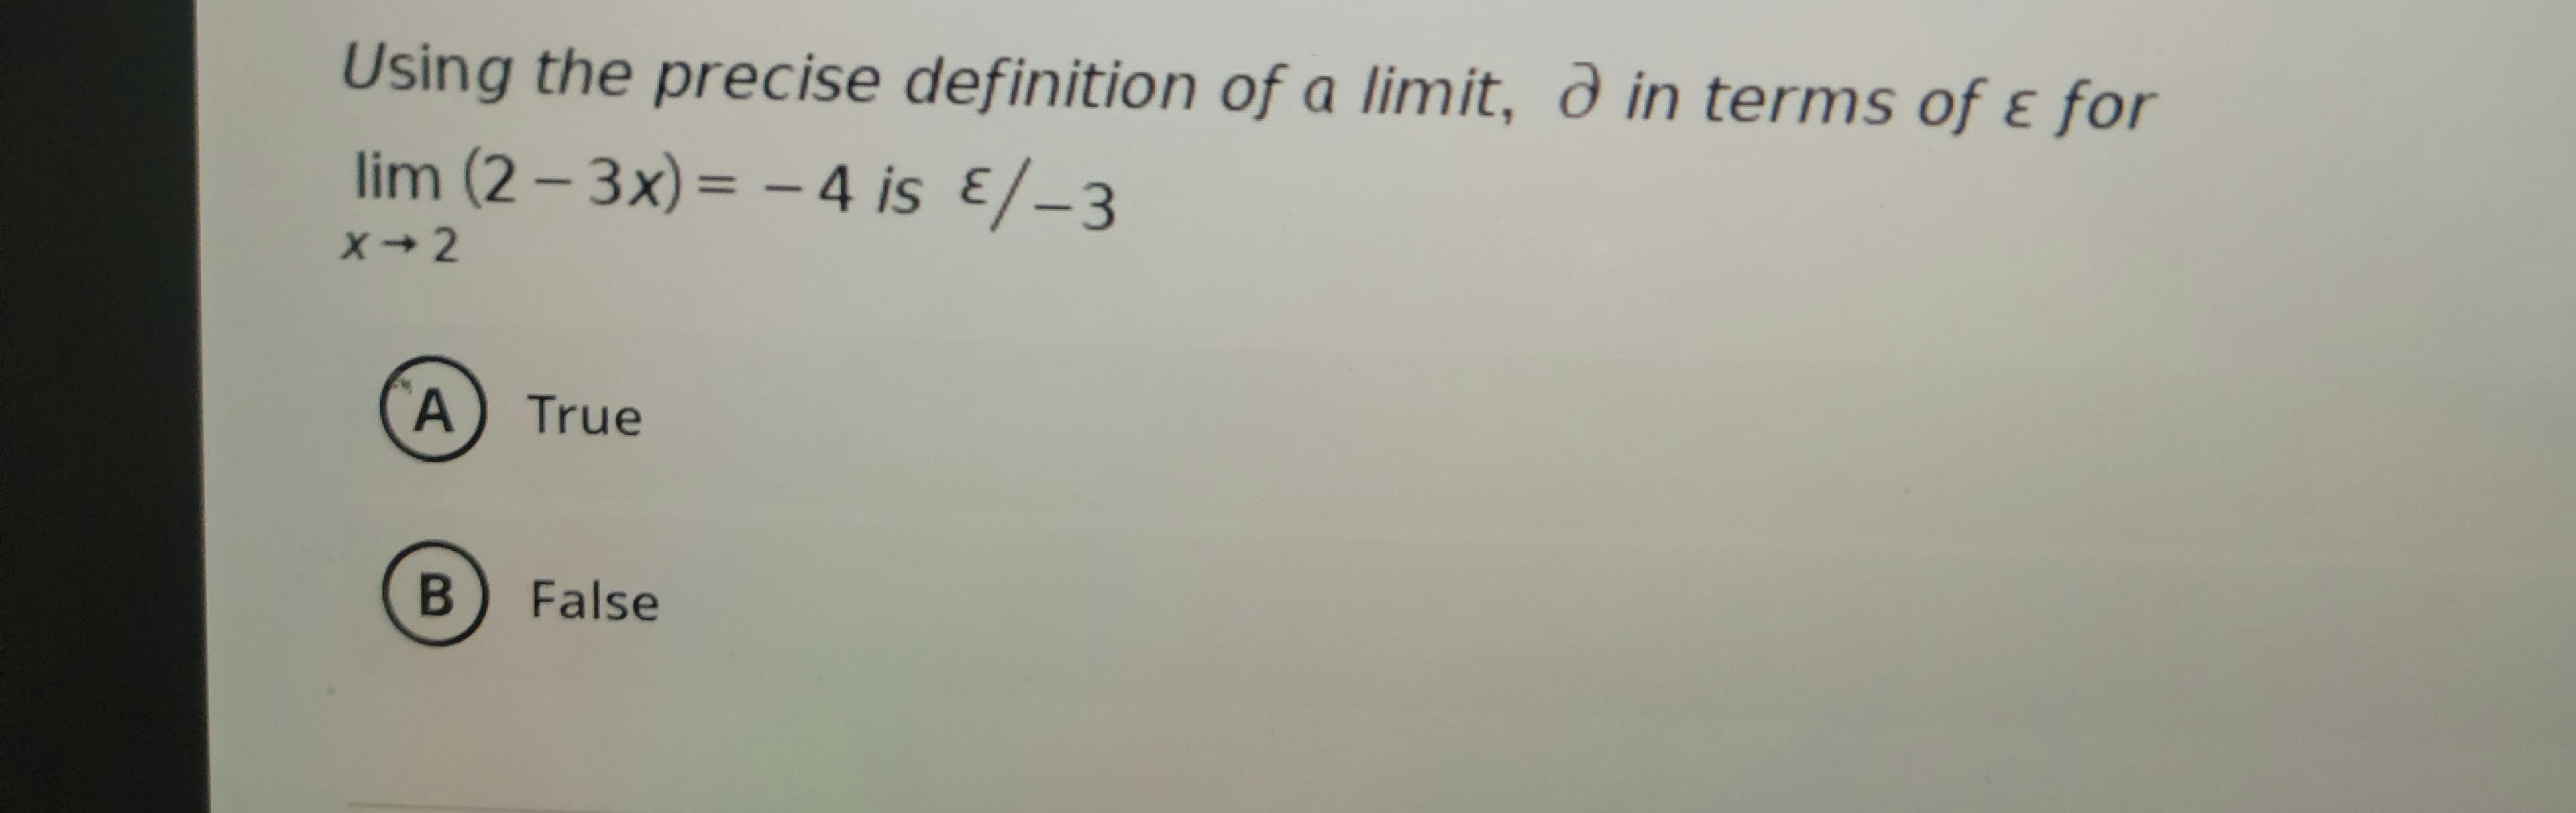 Using the precise definition of a limit, à in terms of & for
lim (2-3x) = -4 is E/-3
X-2
A) True
B
False